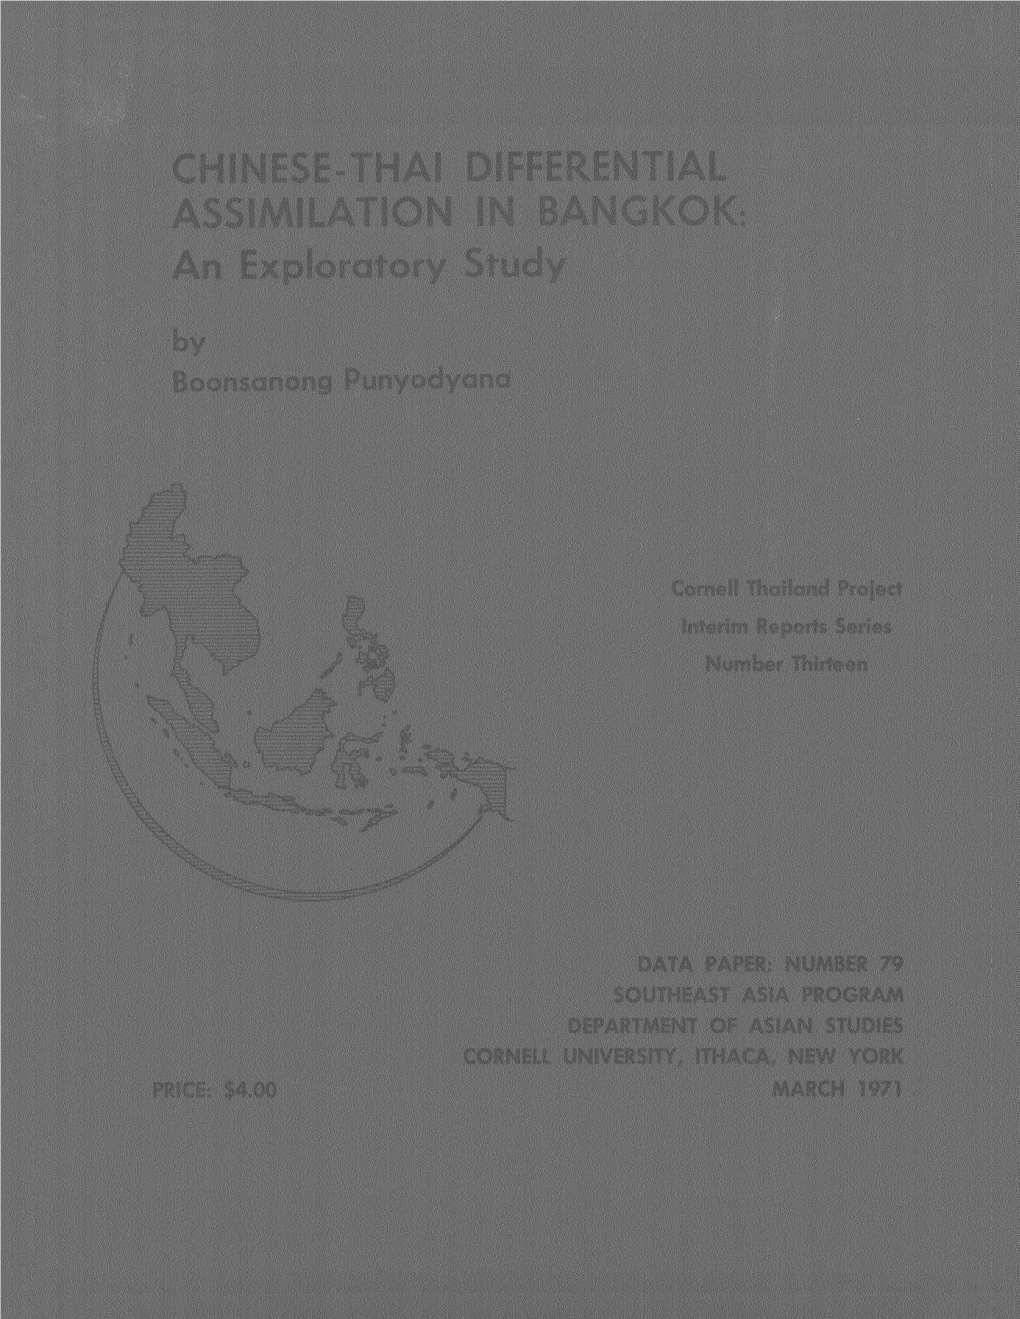 Chinese-Thai Differential Assimilation in Bangkok: an Exploratory Study the Cornell University Southeast Asia Program